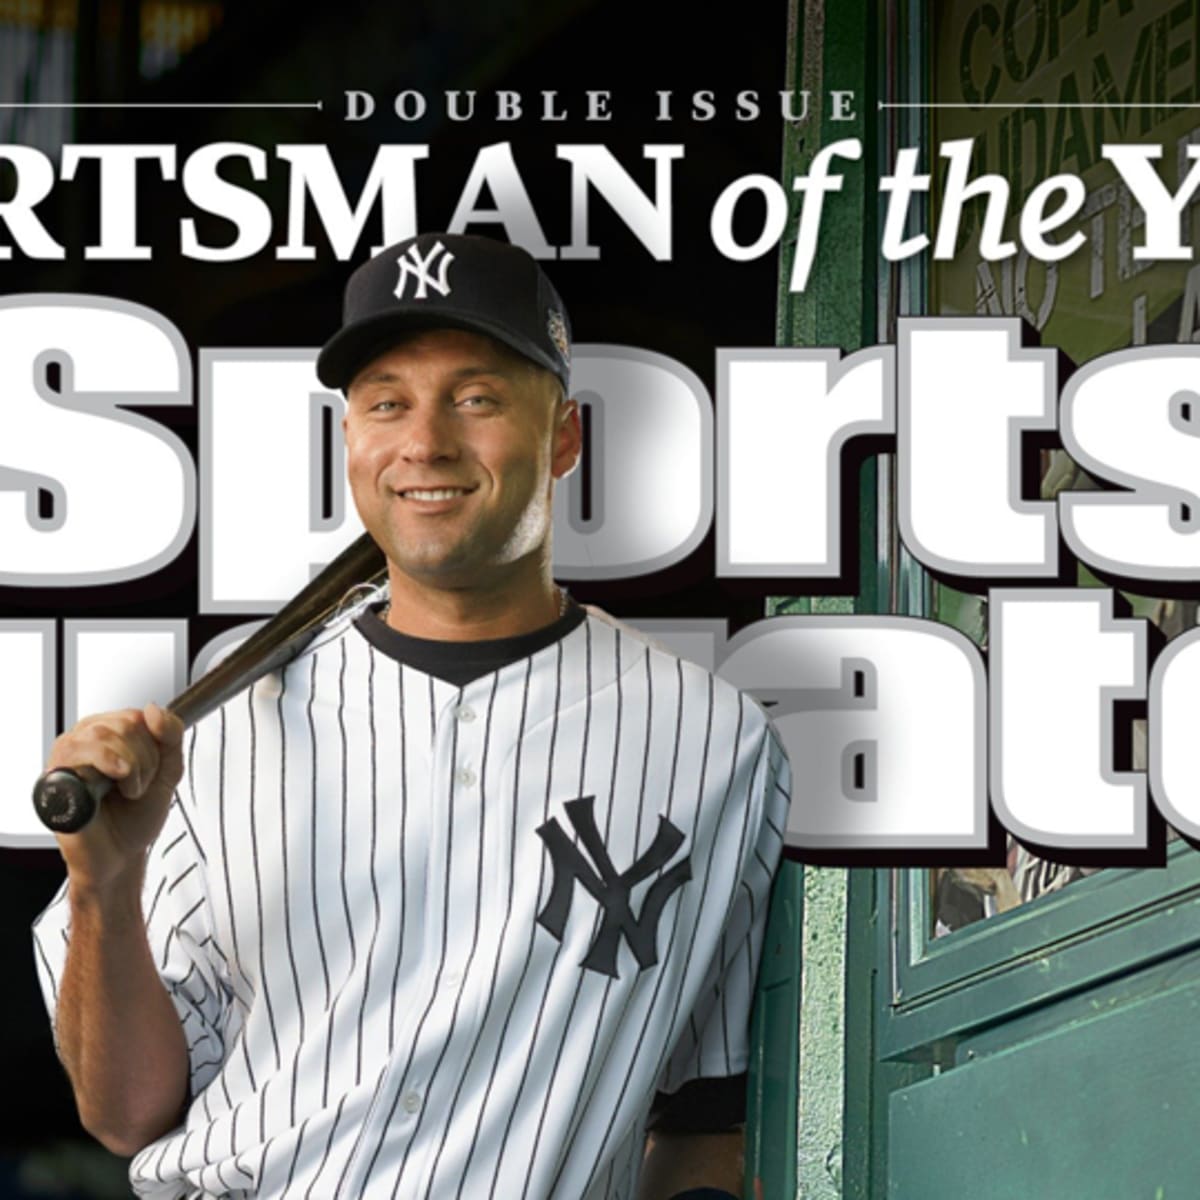 New York Yankees Derek Jeter, 2009 World Series Sports Illustrated Cover by  Sports Illustrated